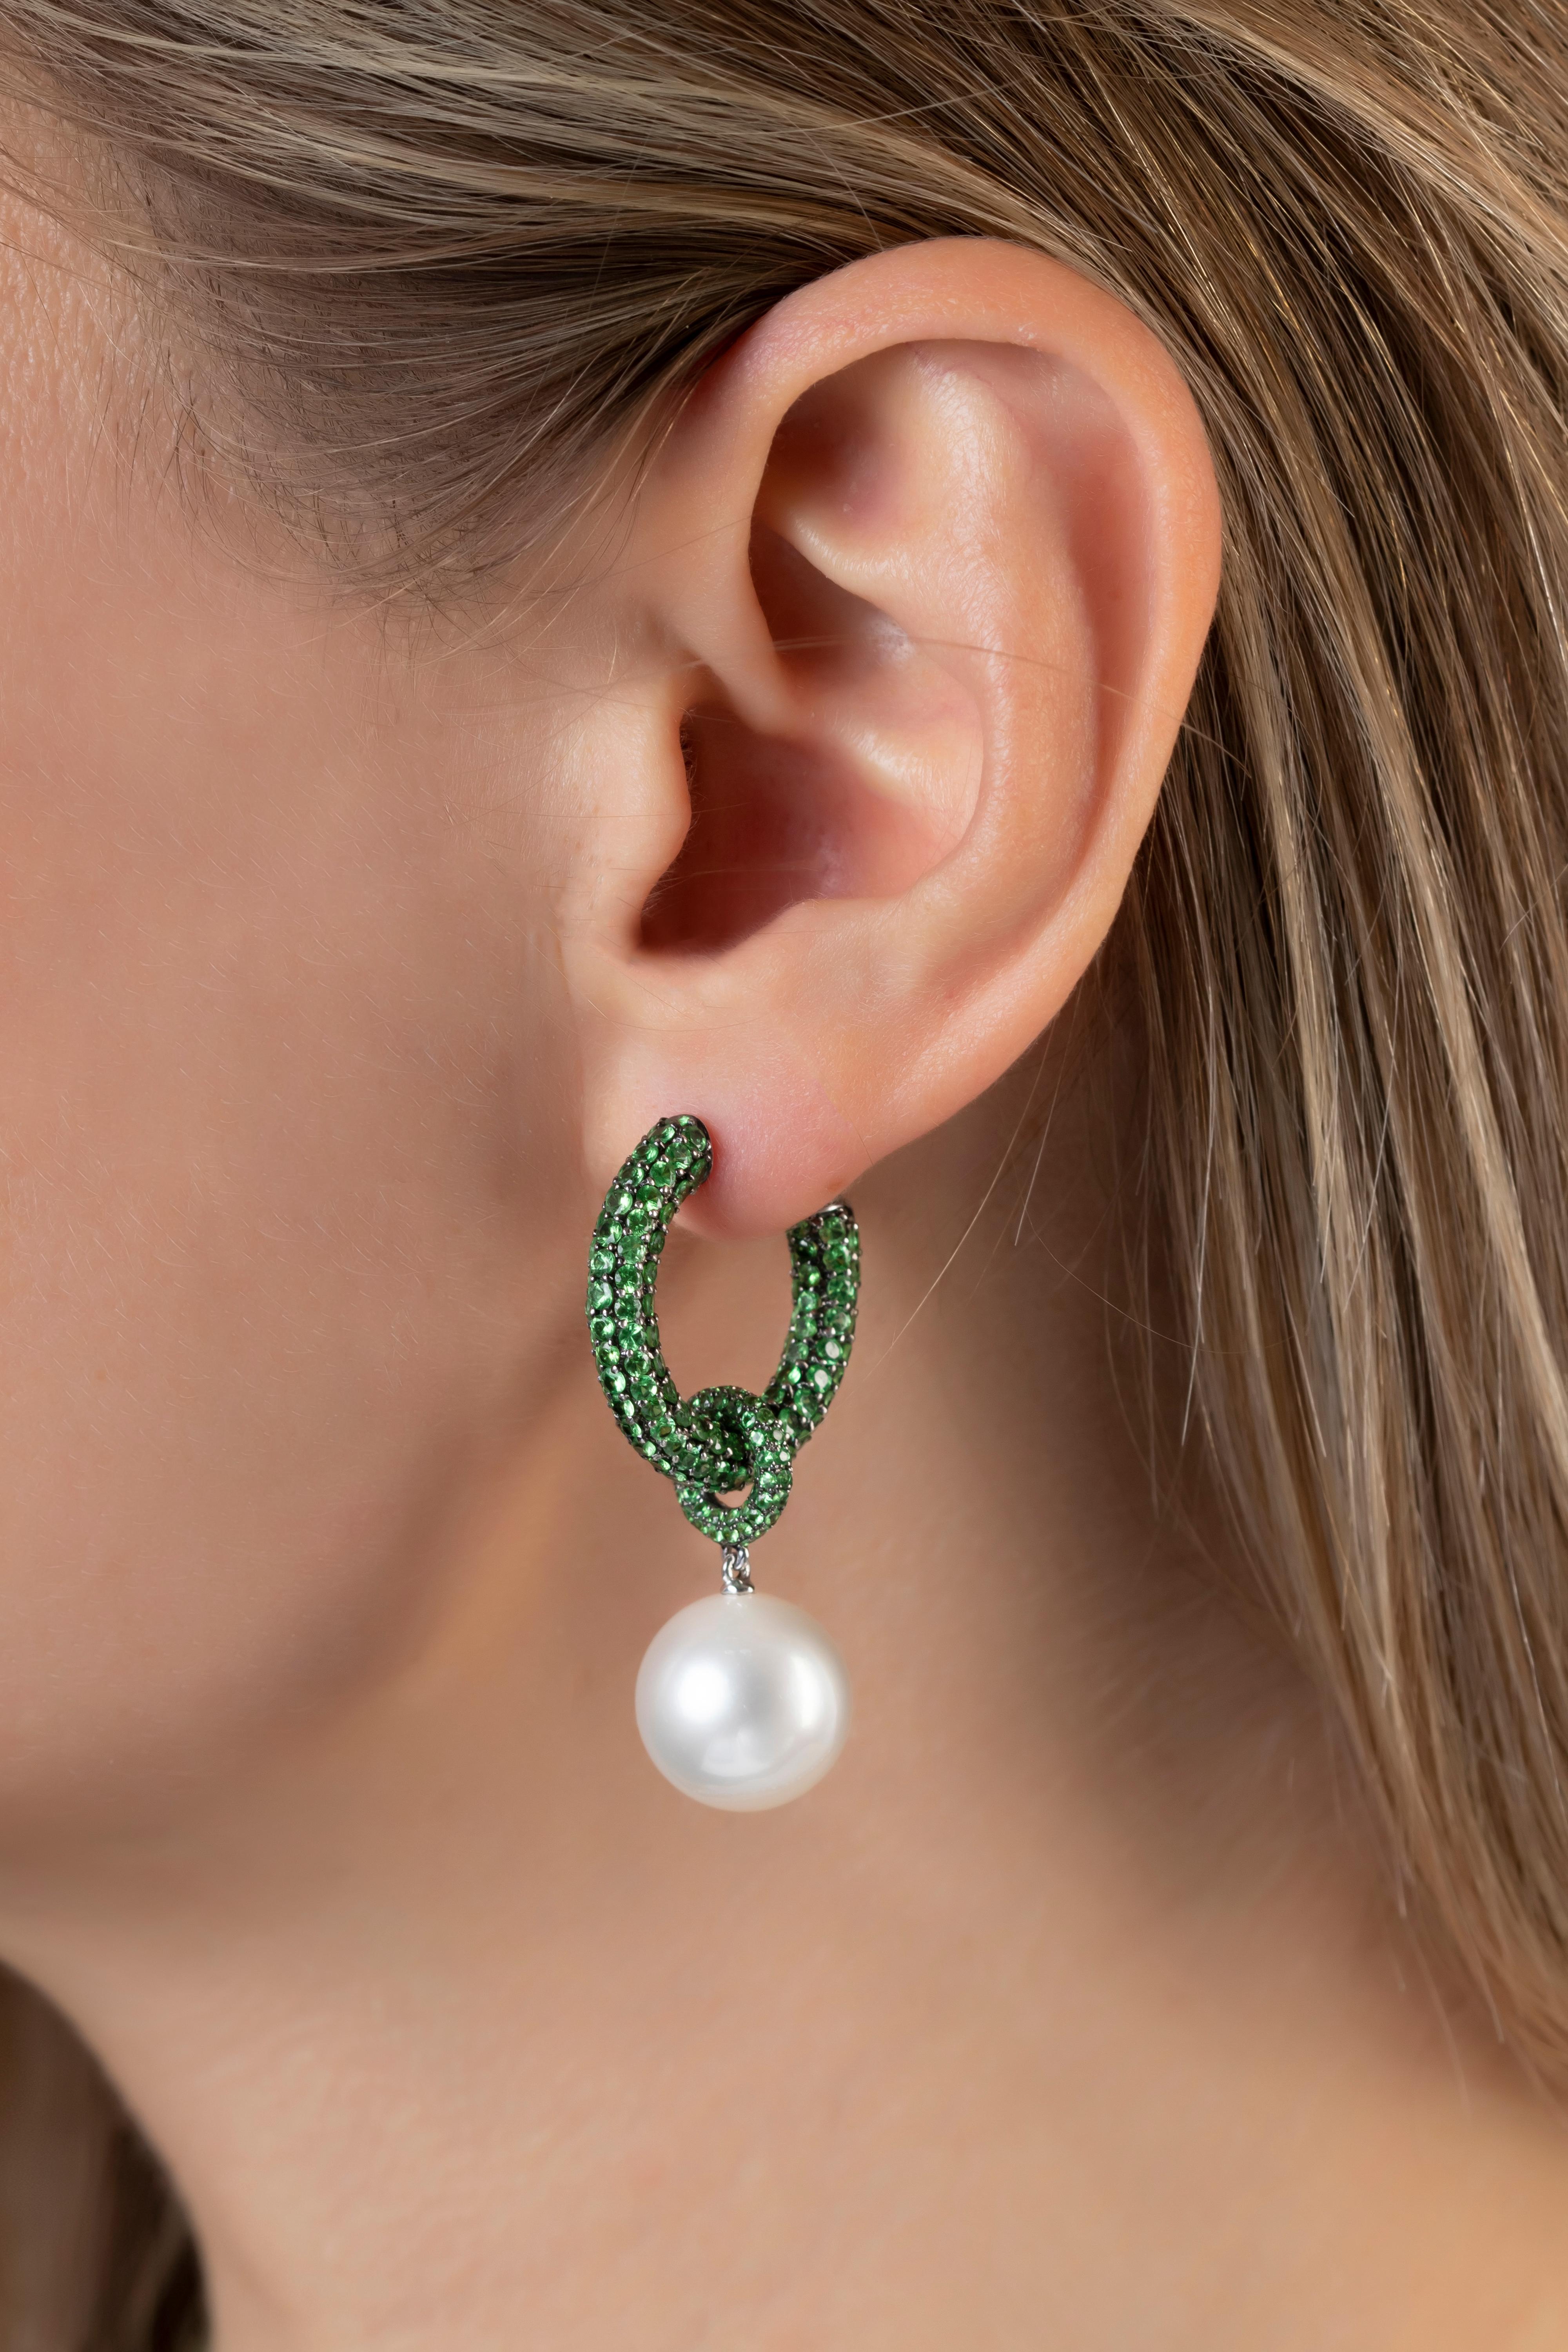 These unique earrings by Yoko London feature lustrous South Sea pearls beneath a mesmerising hoop of green tsavorite garnets. For added versatility the pearl can be removed allowing the hoop of green garnets to be worn alone. A truly striking and